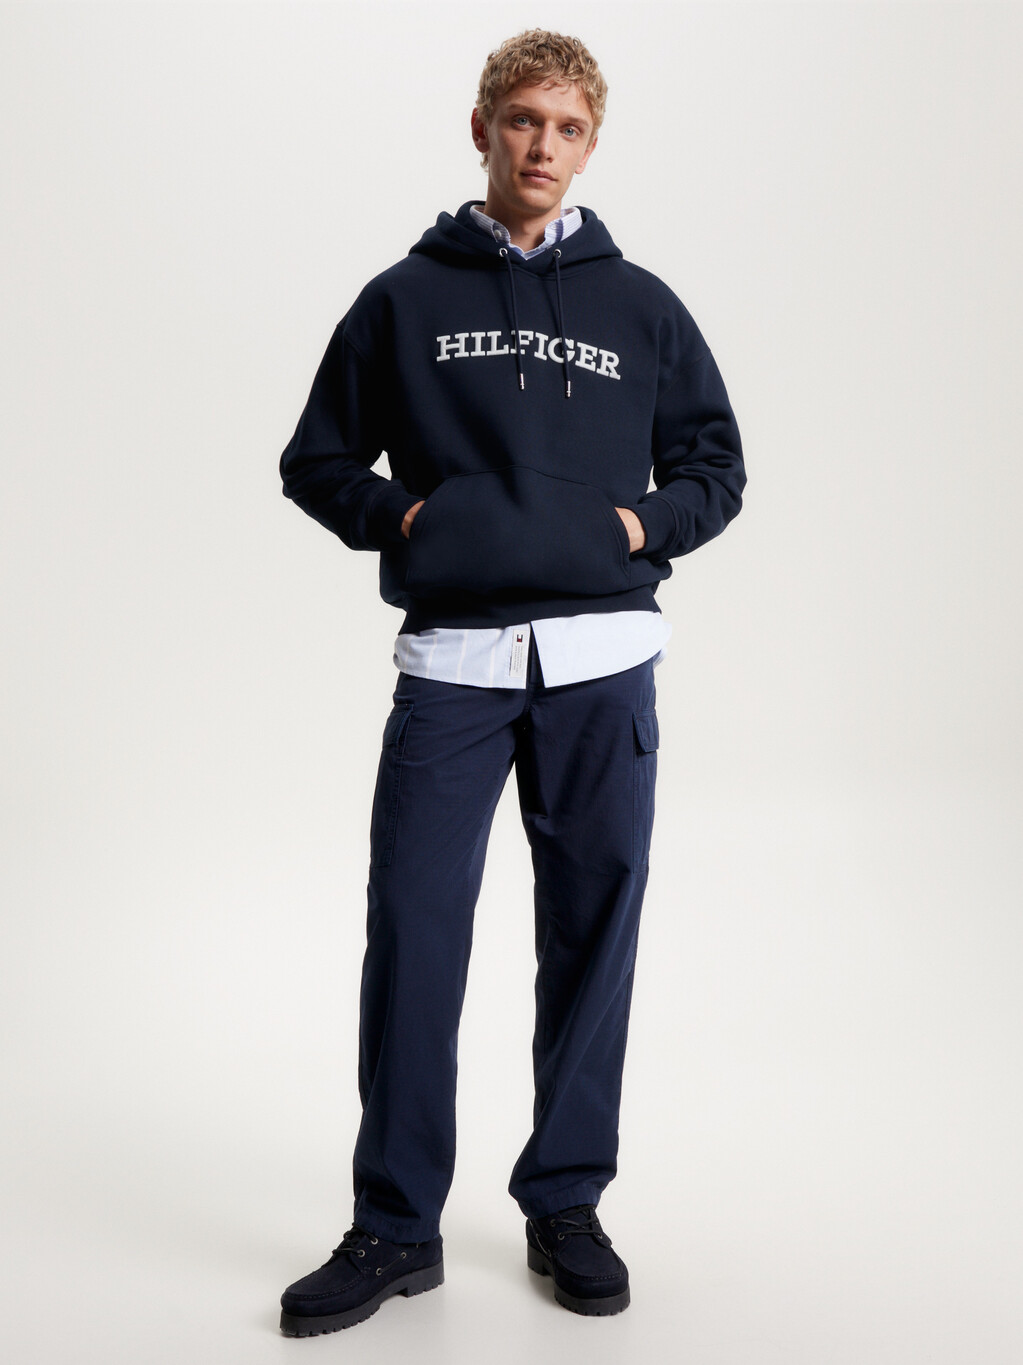 Hilfiger Monotype Embroidery Archive Fit Hoody, Desert Sky, hi-res